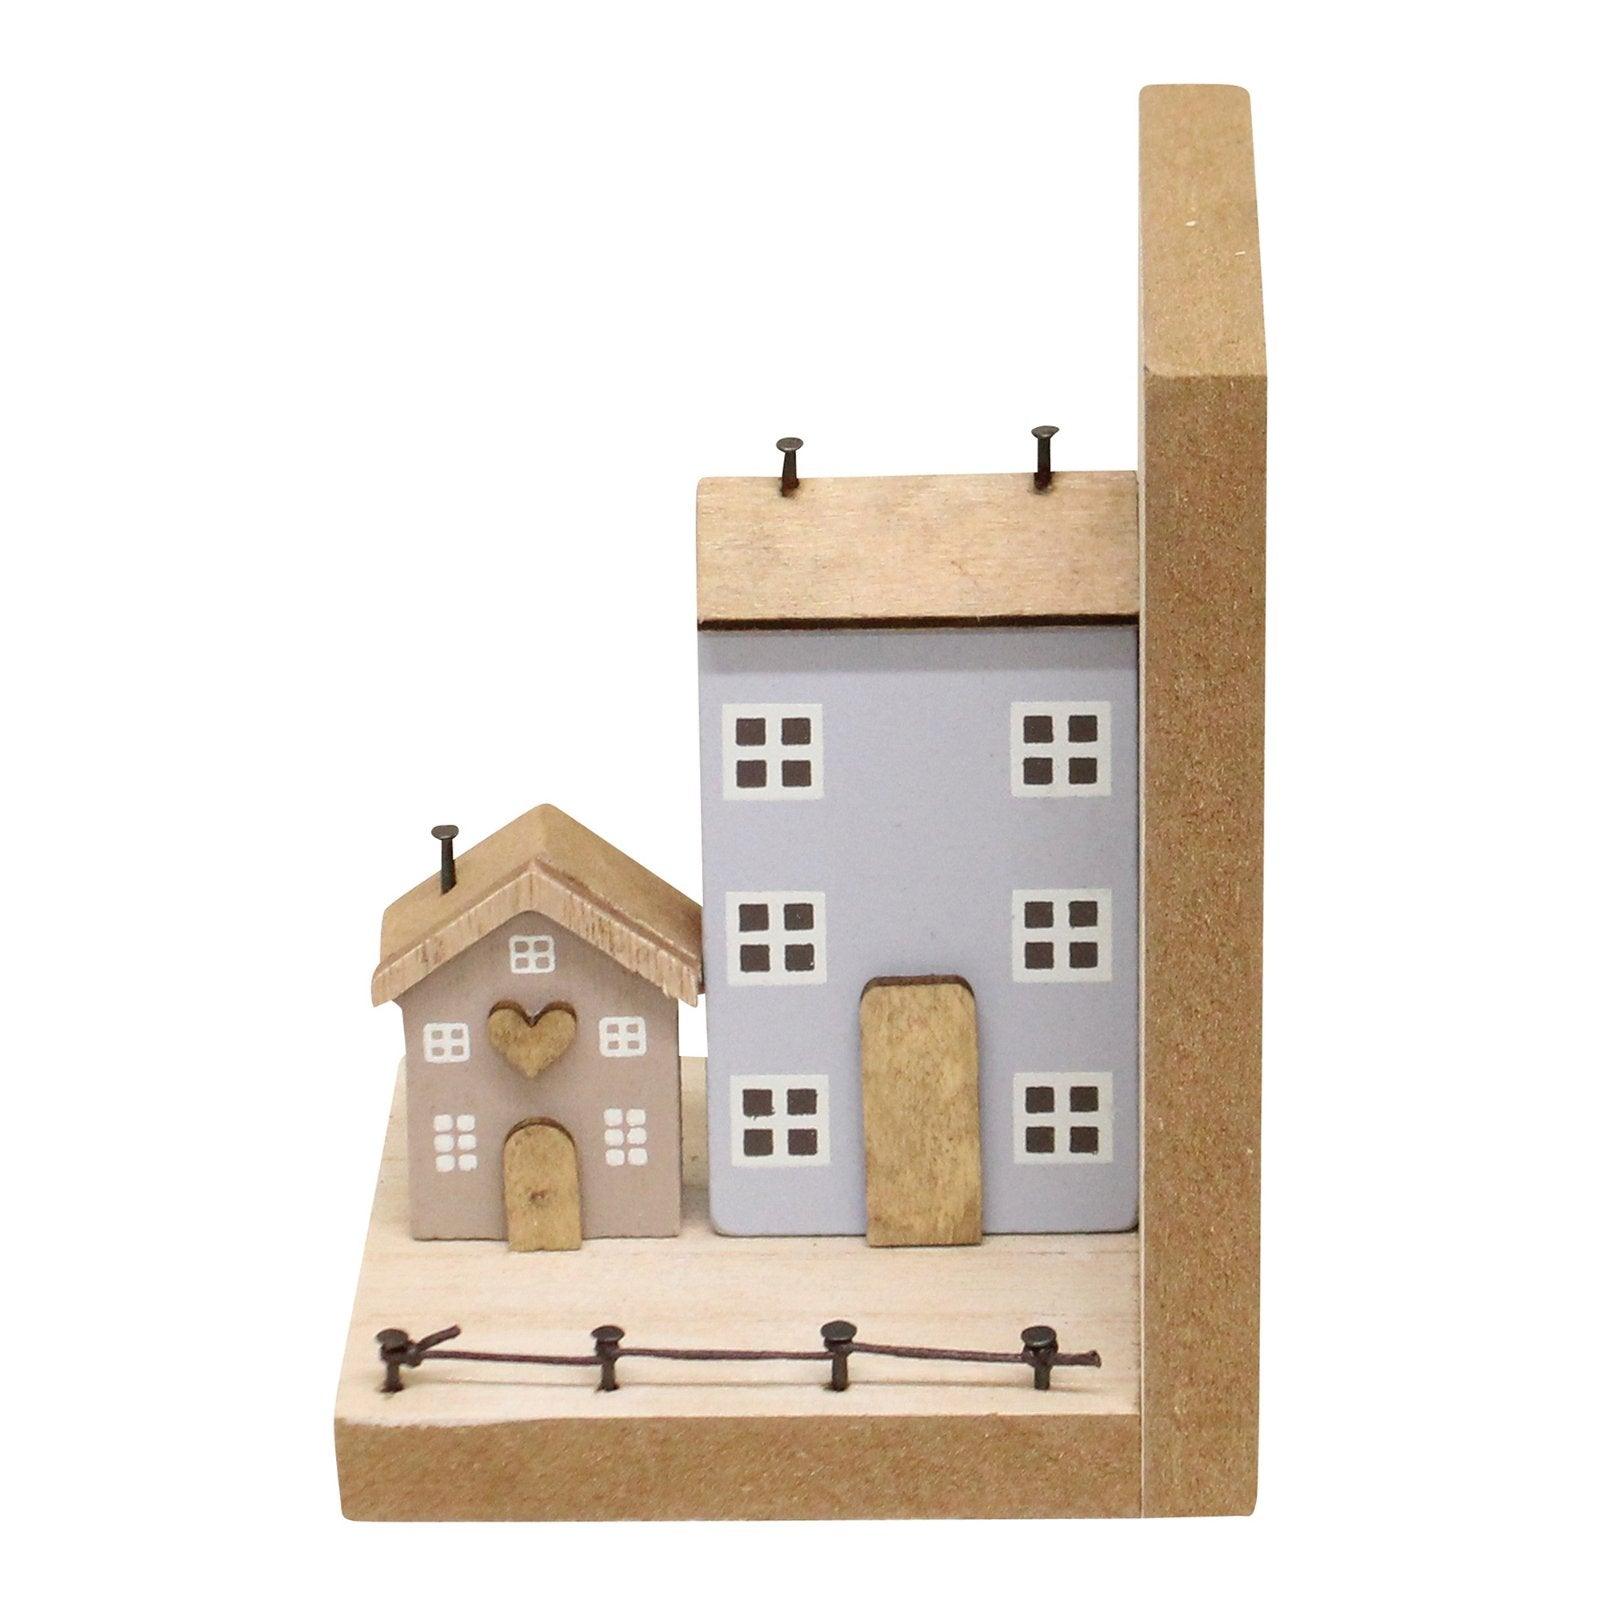 View Pair of Bookends Wooden Houses Design information